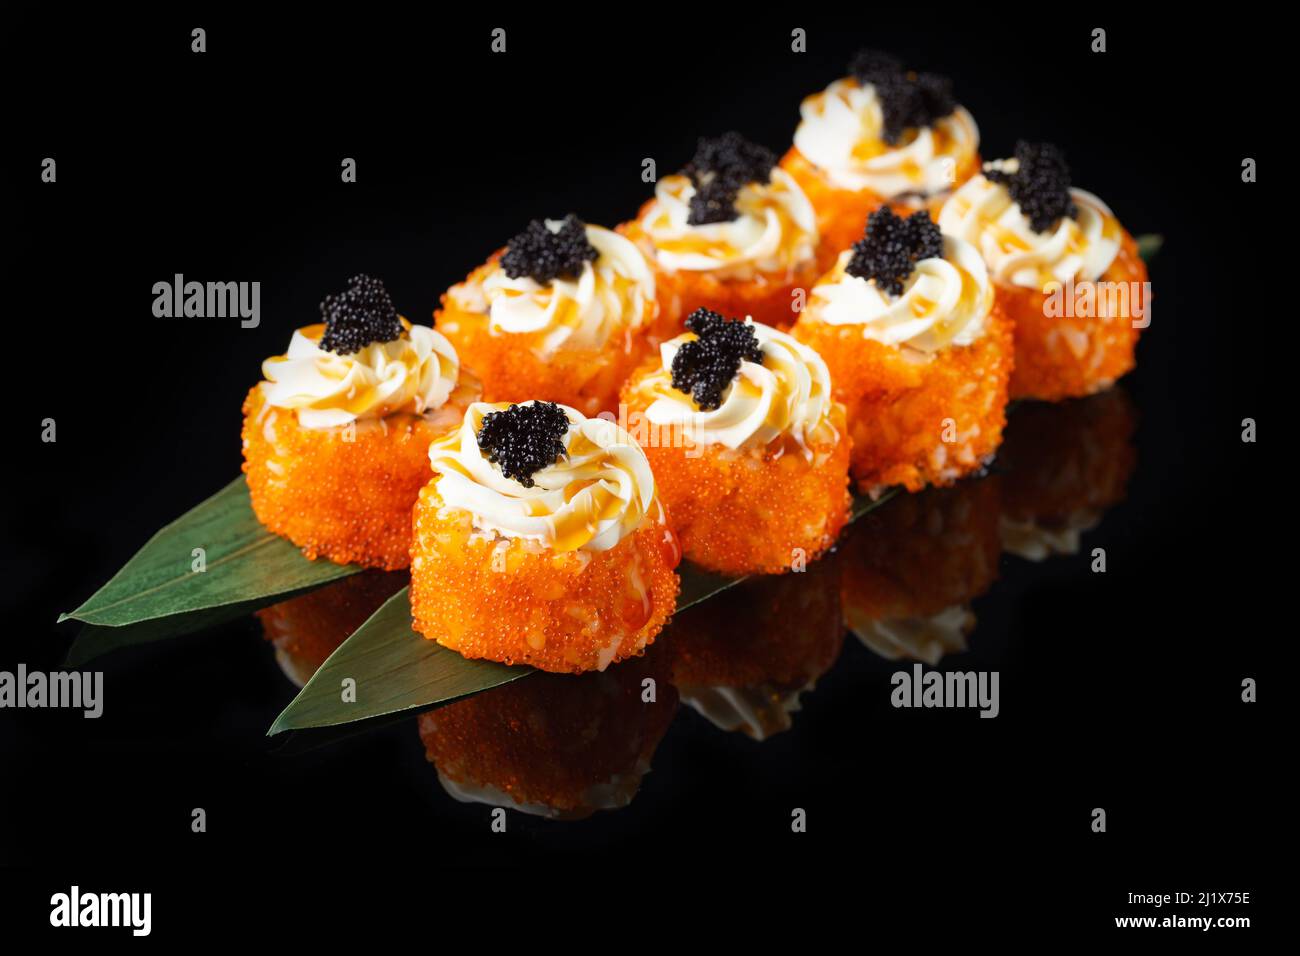 Traditional delicious fresh sushi roll set on a black background with reflection. Sushi roll with rice, nori, cream cheese, tobiko caviar, avocado. Su Stock Photo